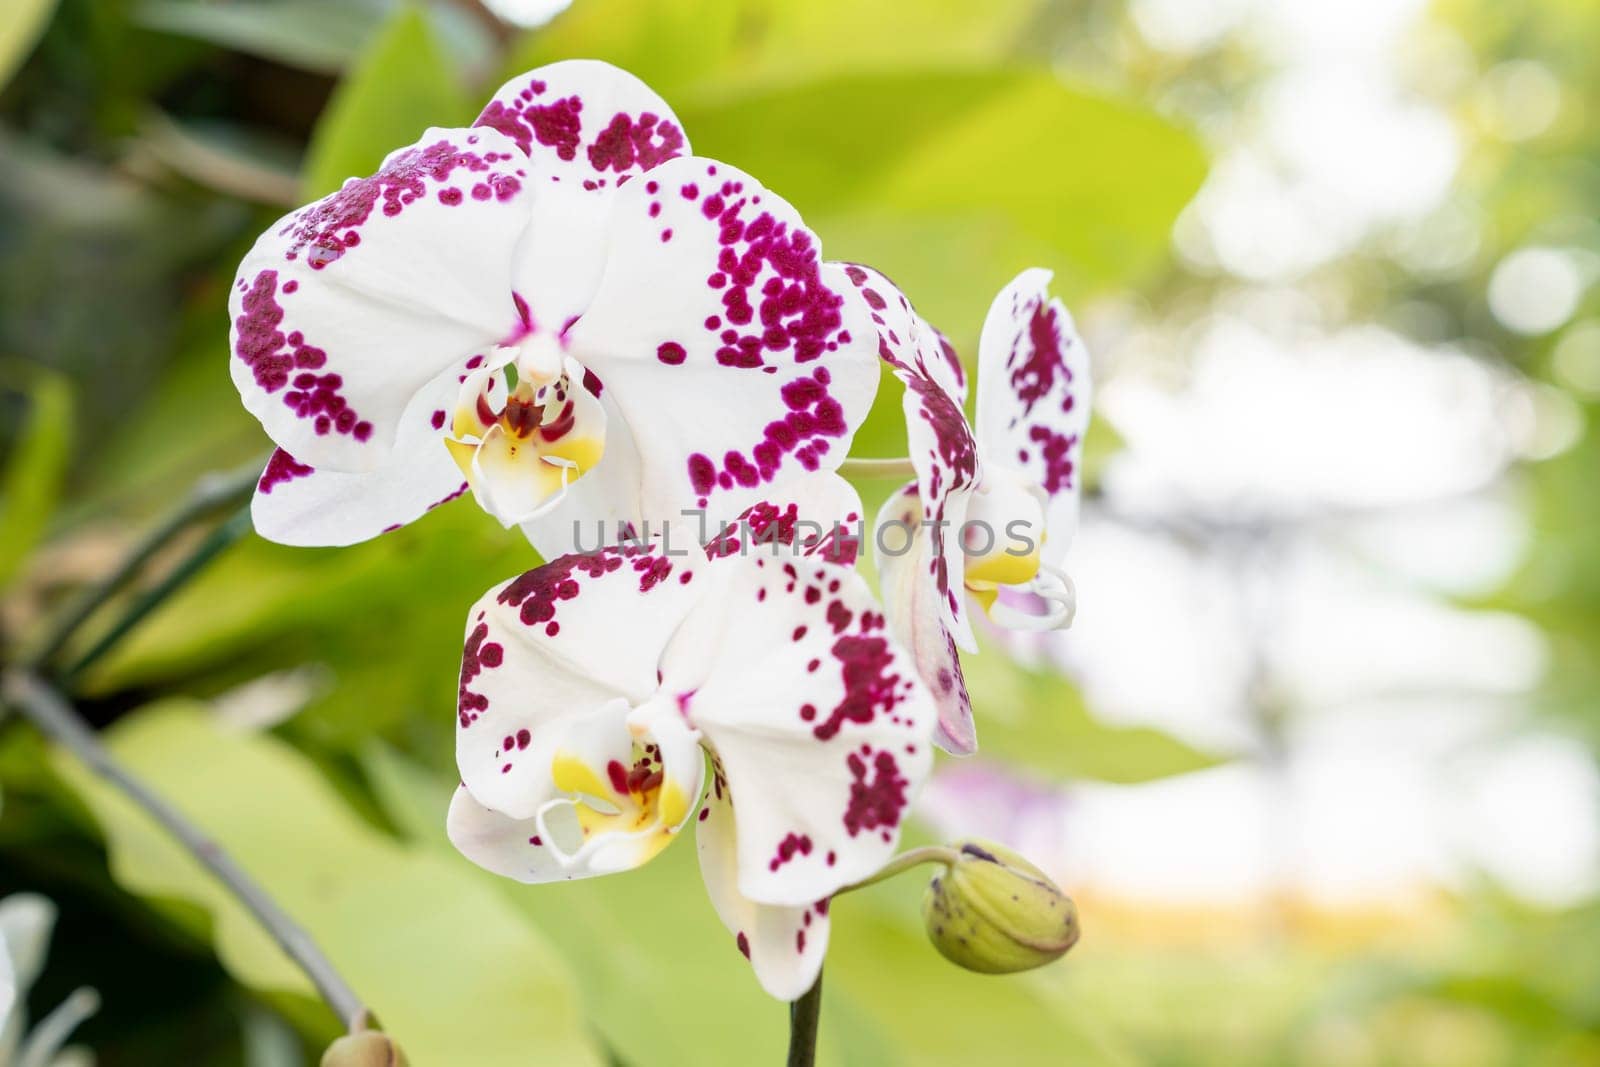 White Orchid plant in nature garden